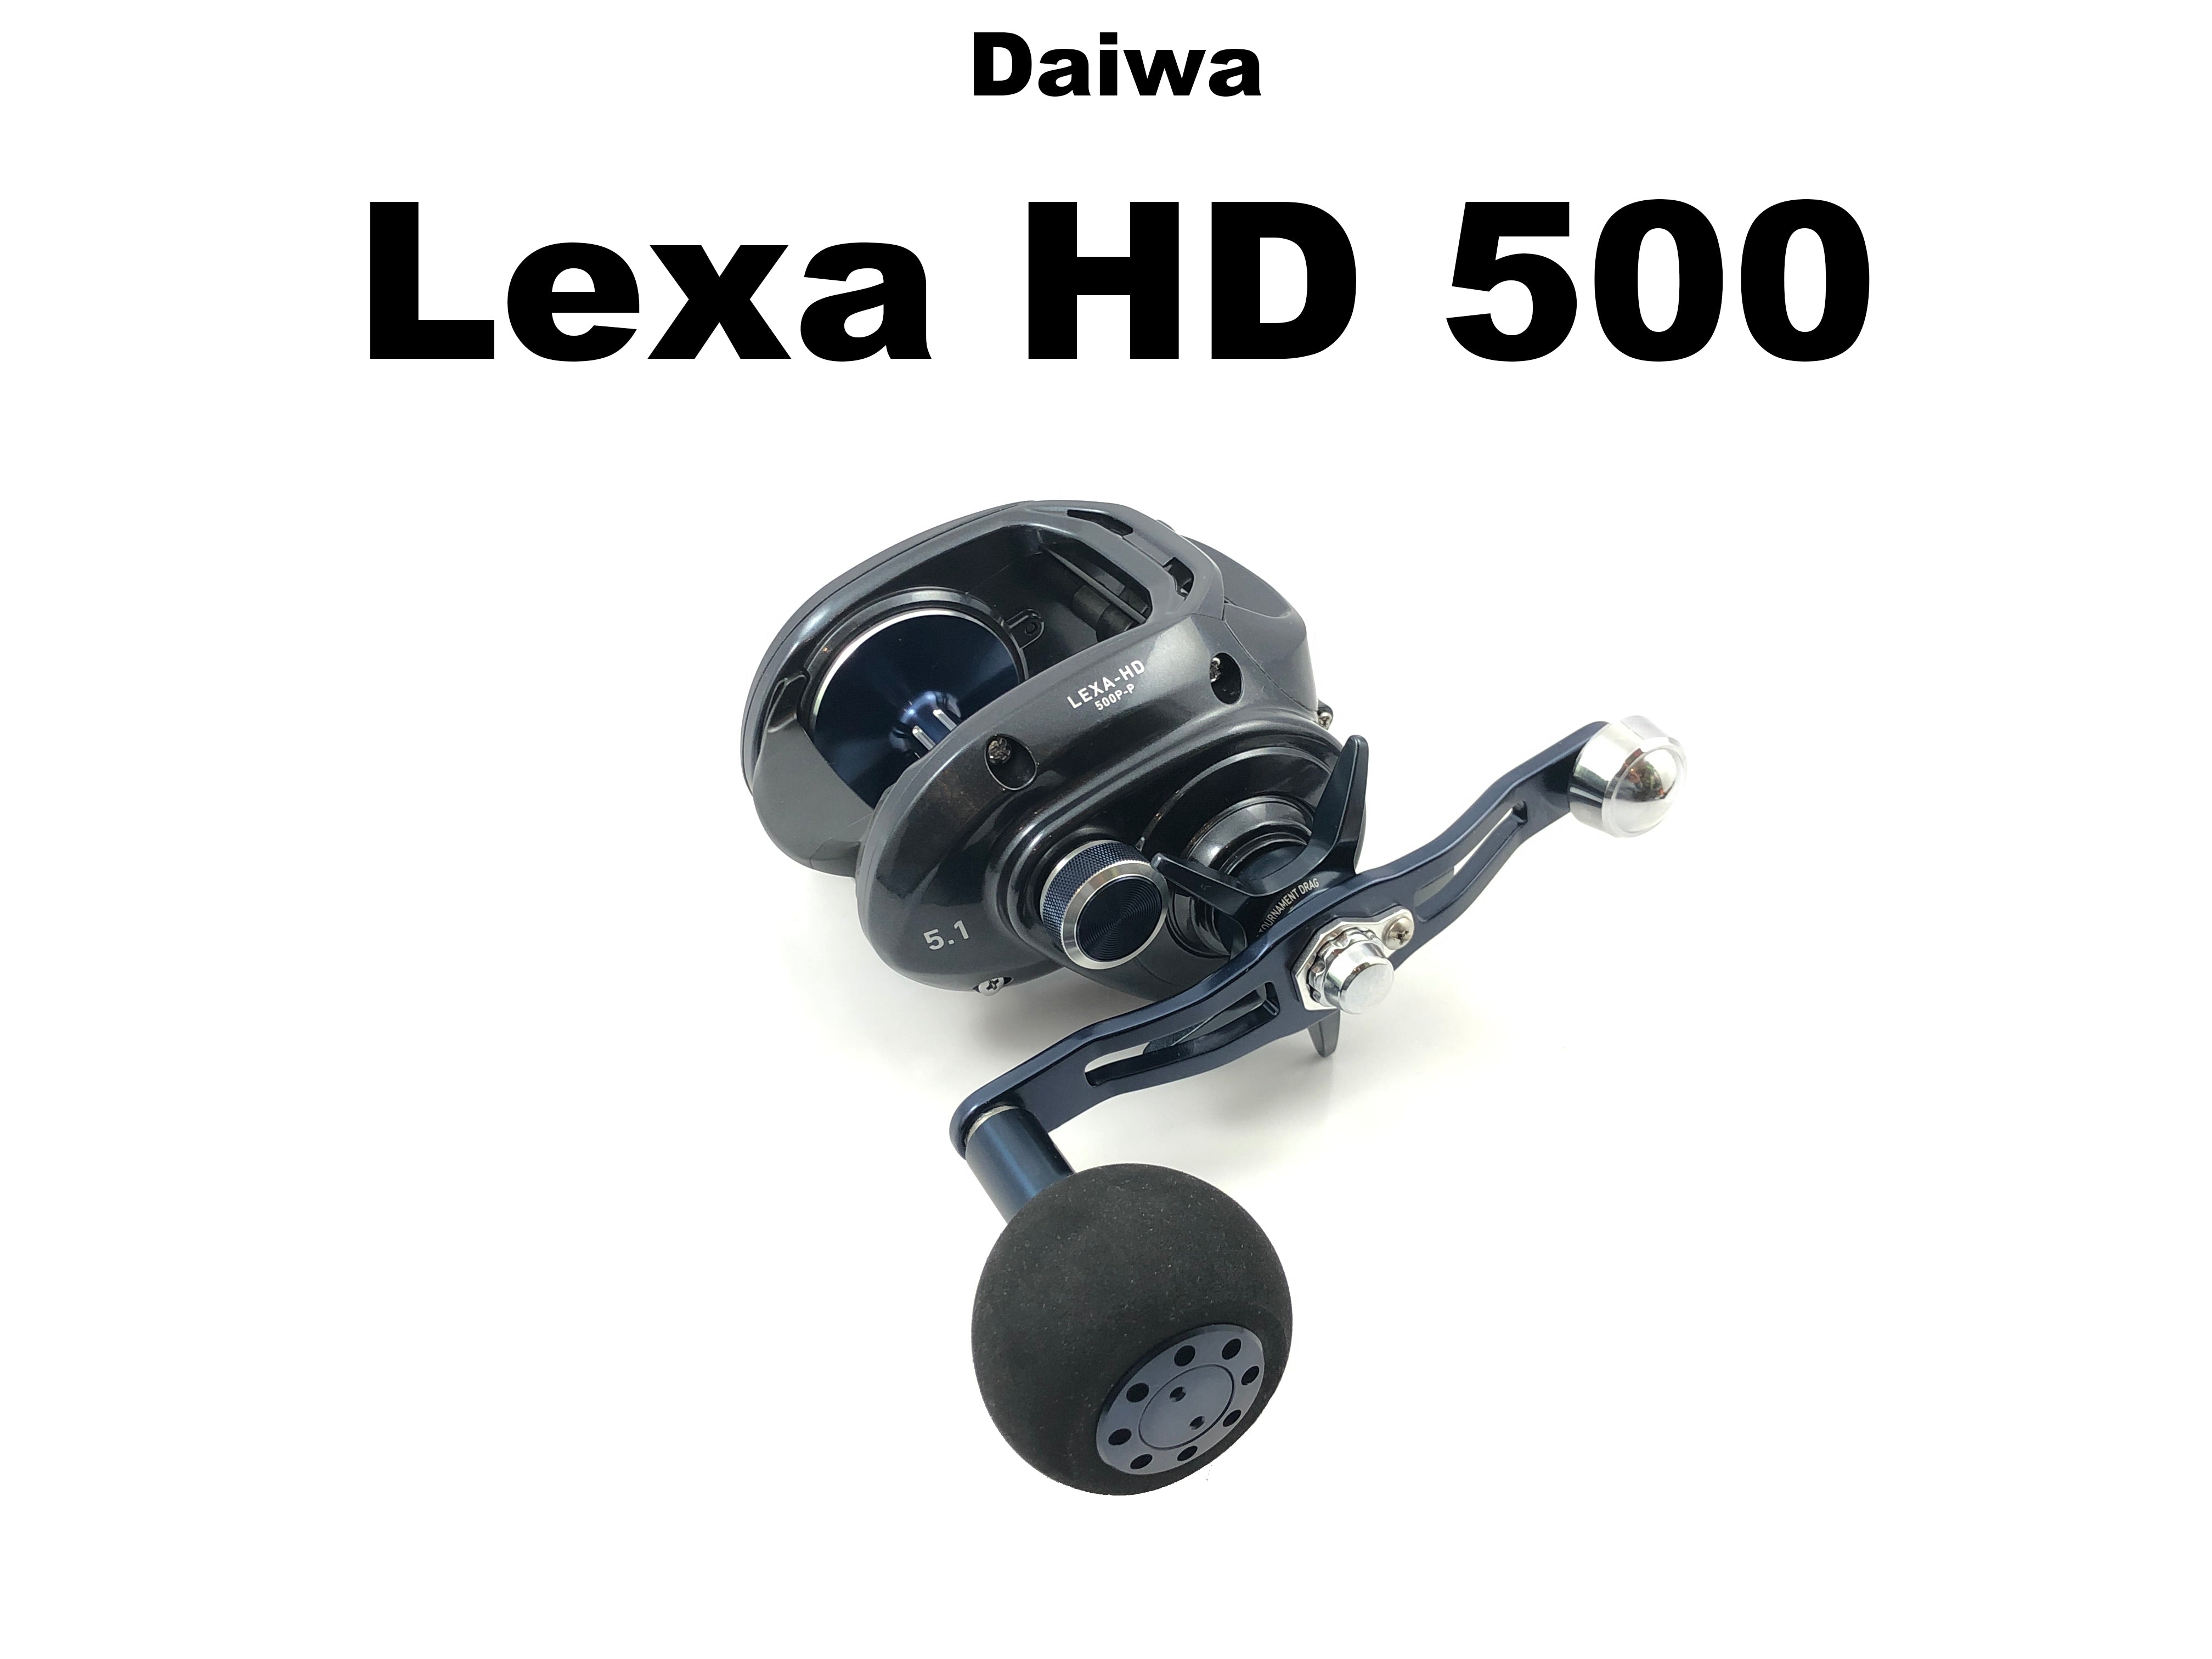 High Speed Musky Baitcasting Reels With Magnetic Brake System 10KG Max  Drag, 7.1 1 Gear Ratio, Metal Handle Ideal Fishing Accessory Model: 230403  From Nian07, $14.92